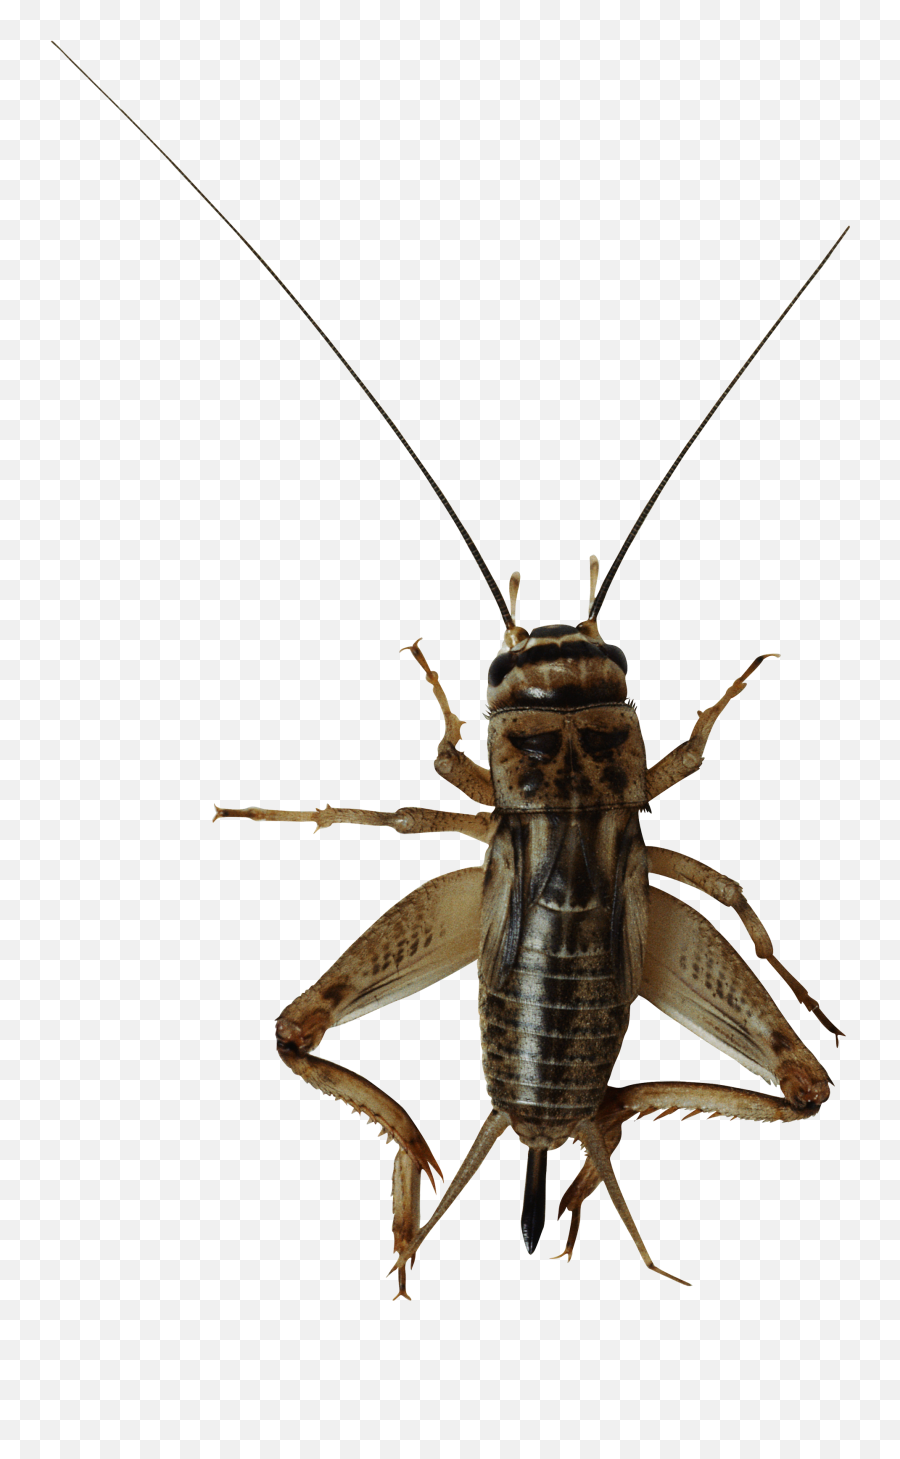 Bug Bugs Insect Cricket Crickets Animal Freetoedit - Cricket Insect Png Emoji,Crickets Emoji